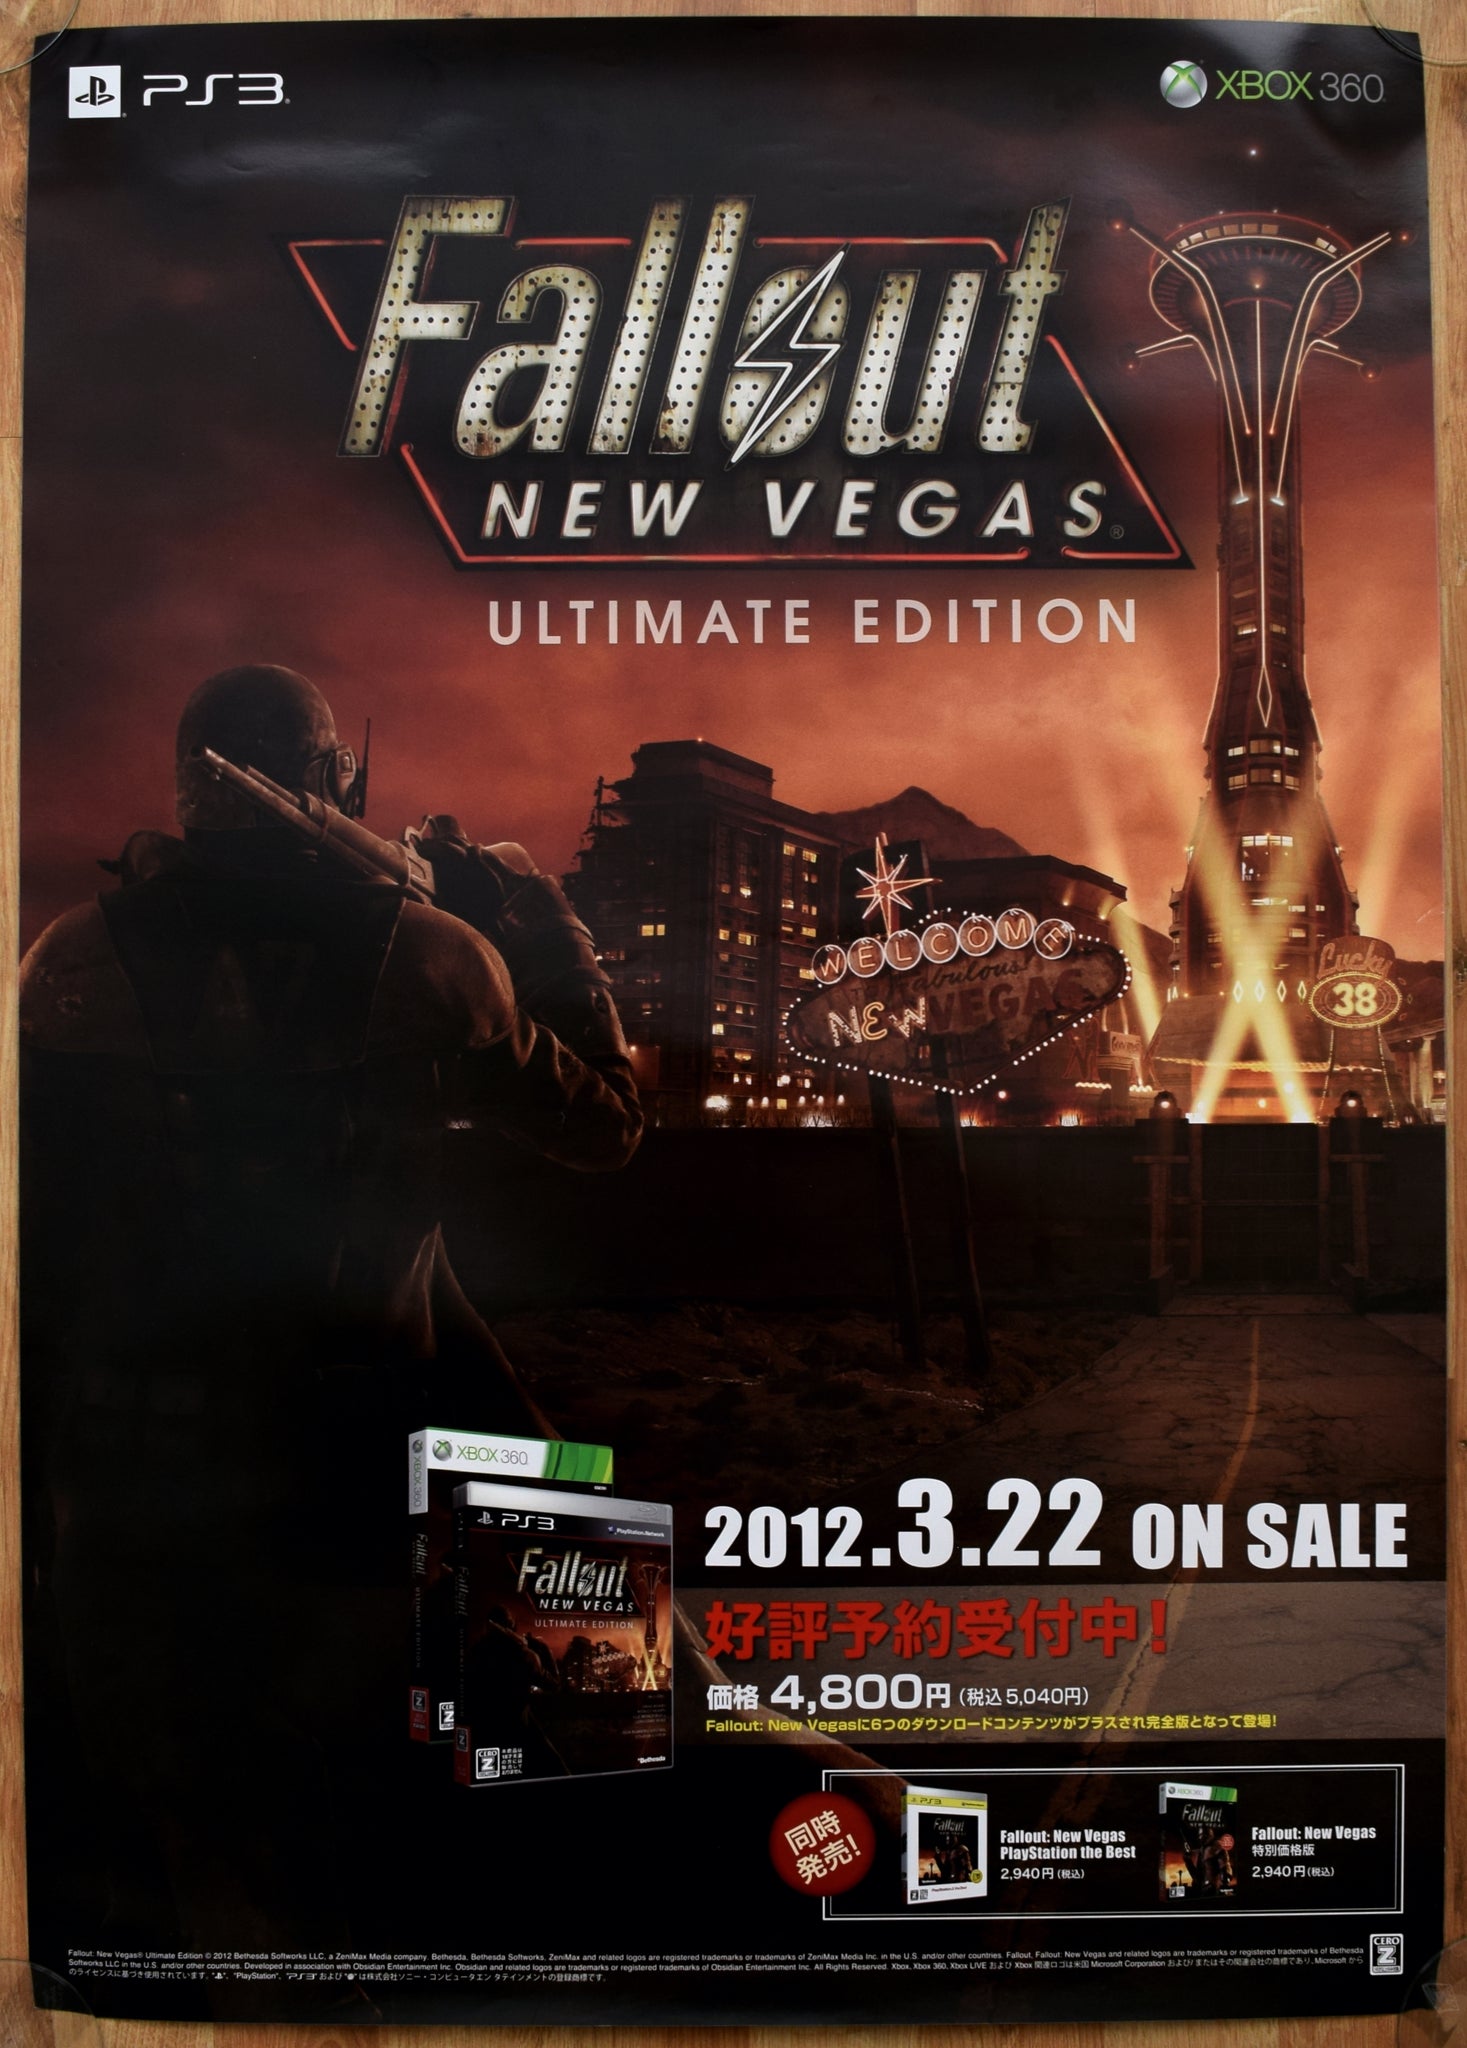 Fallout New Vegas (B2) Japanese Promotional Poster